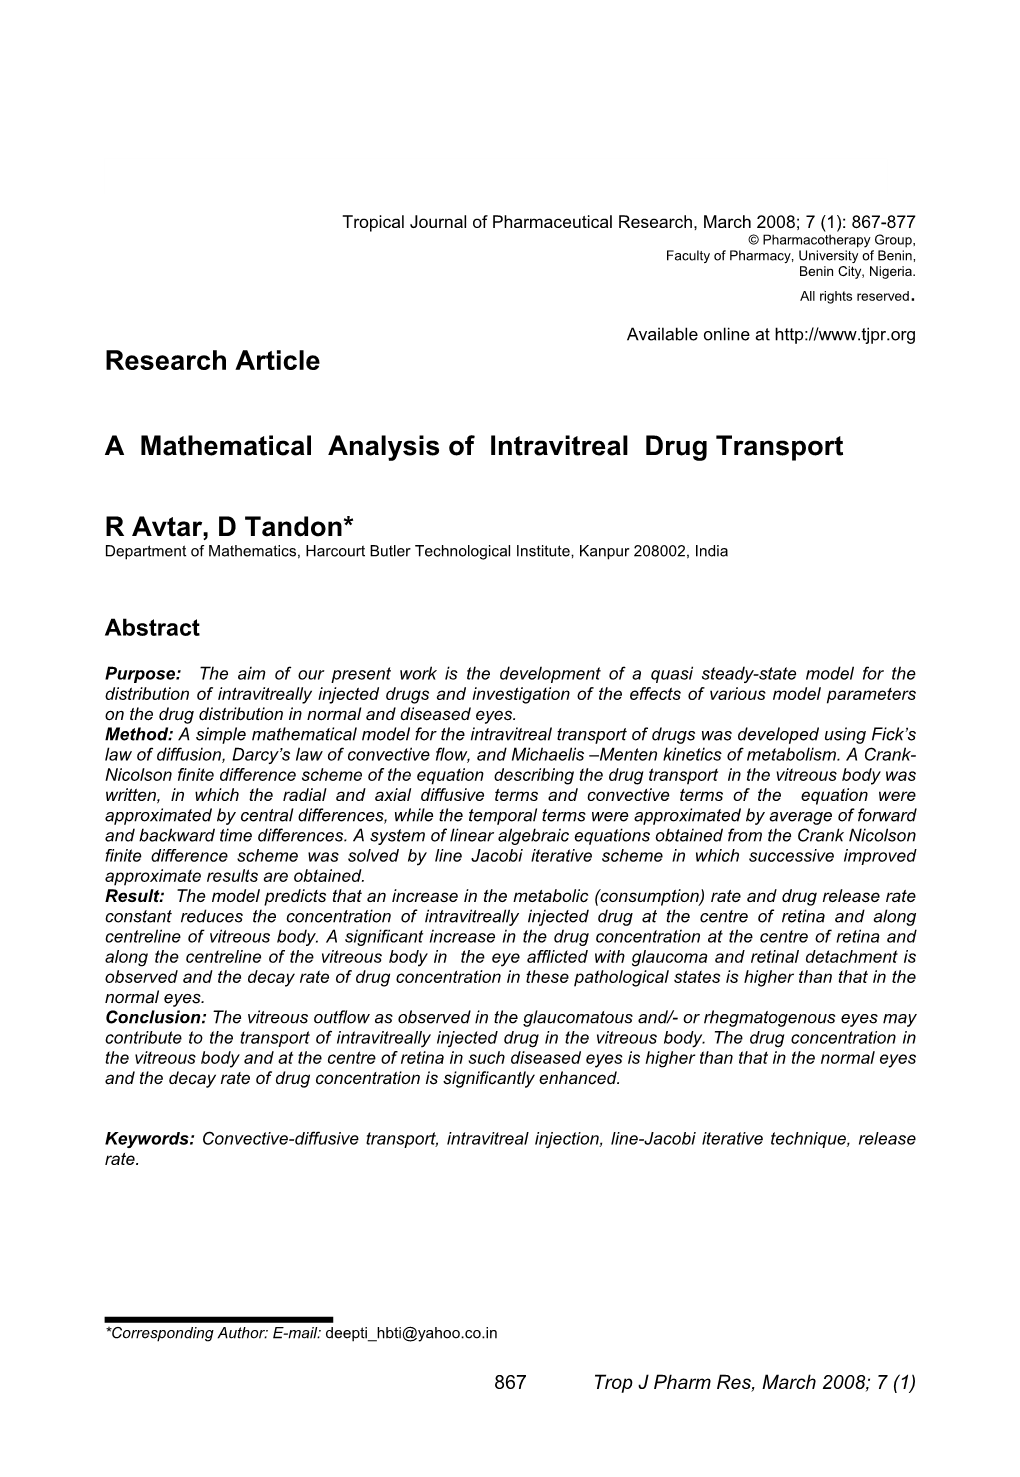 Research Article a Mathematical Analysis of Intravitreal Drug Transport R Avtar, D Tandon*